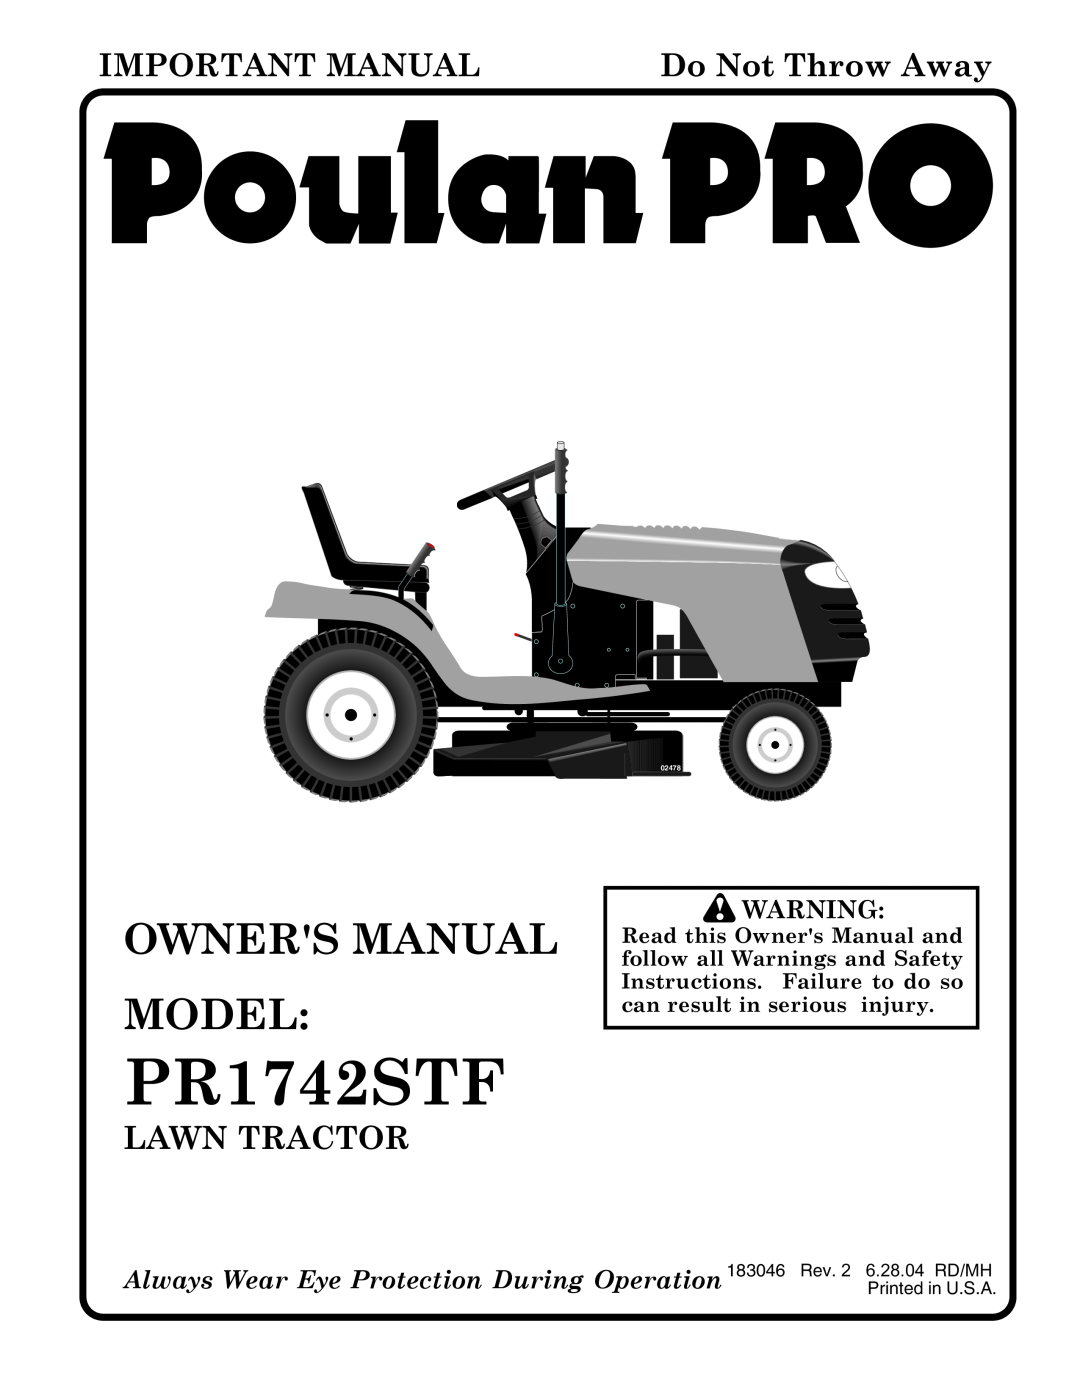 Poulan PR1742STF owner manual Important Manual, Do Not Throw Away, Lawn Tractor, 02478 